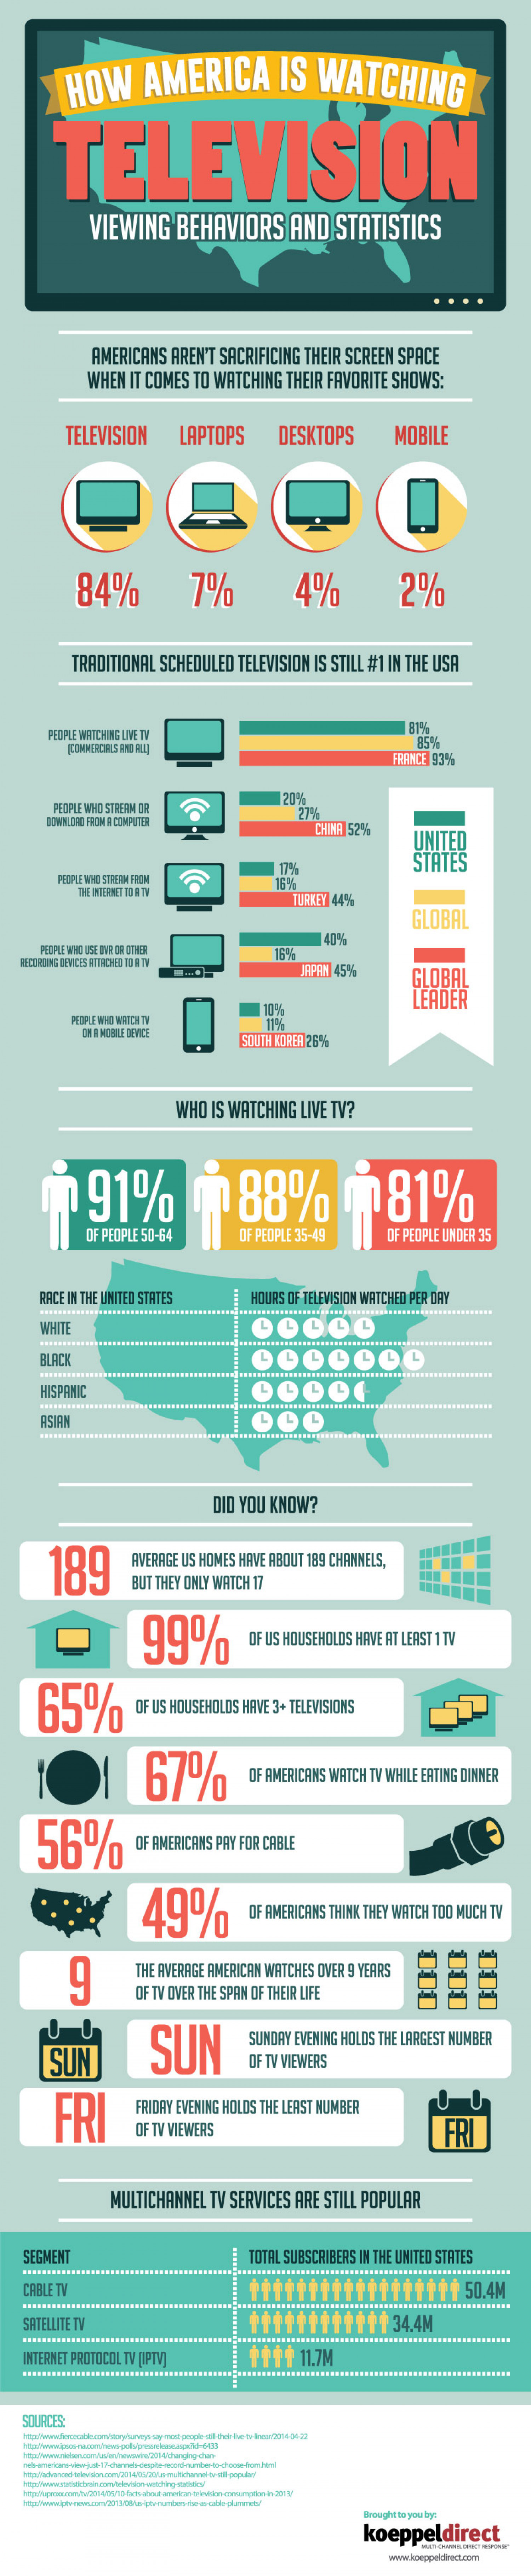 How America is Watching TV Infographic